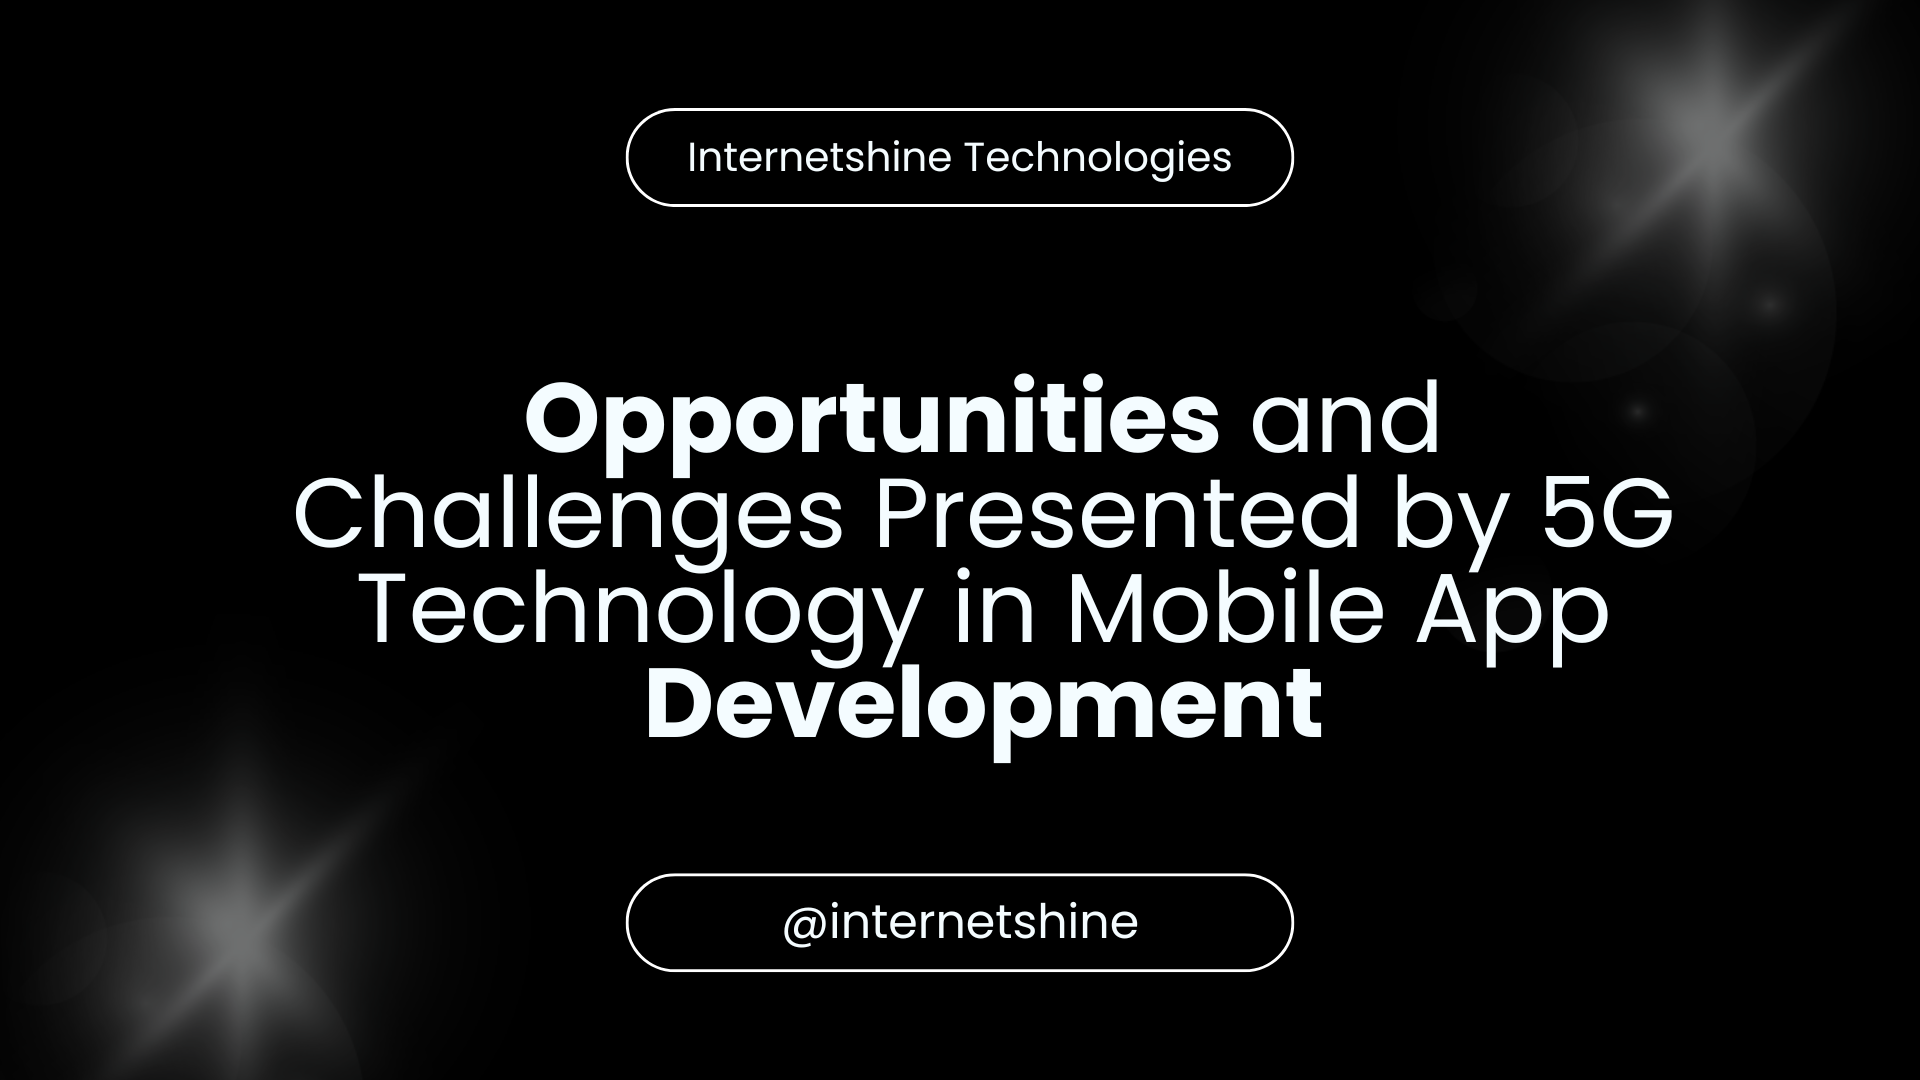 Opportunities and Challenges Presented by 5G Technology in Mobile App Development